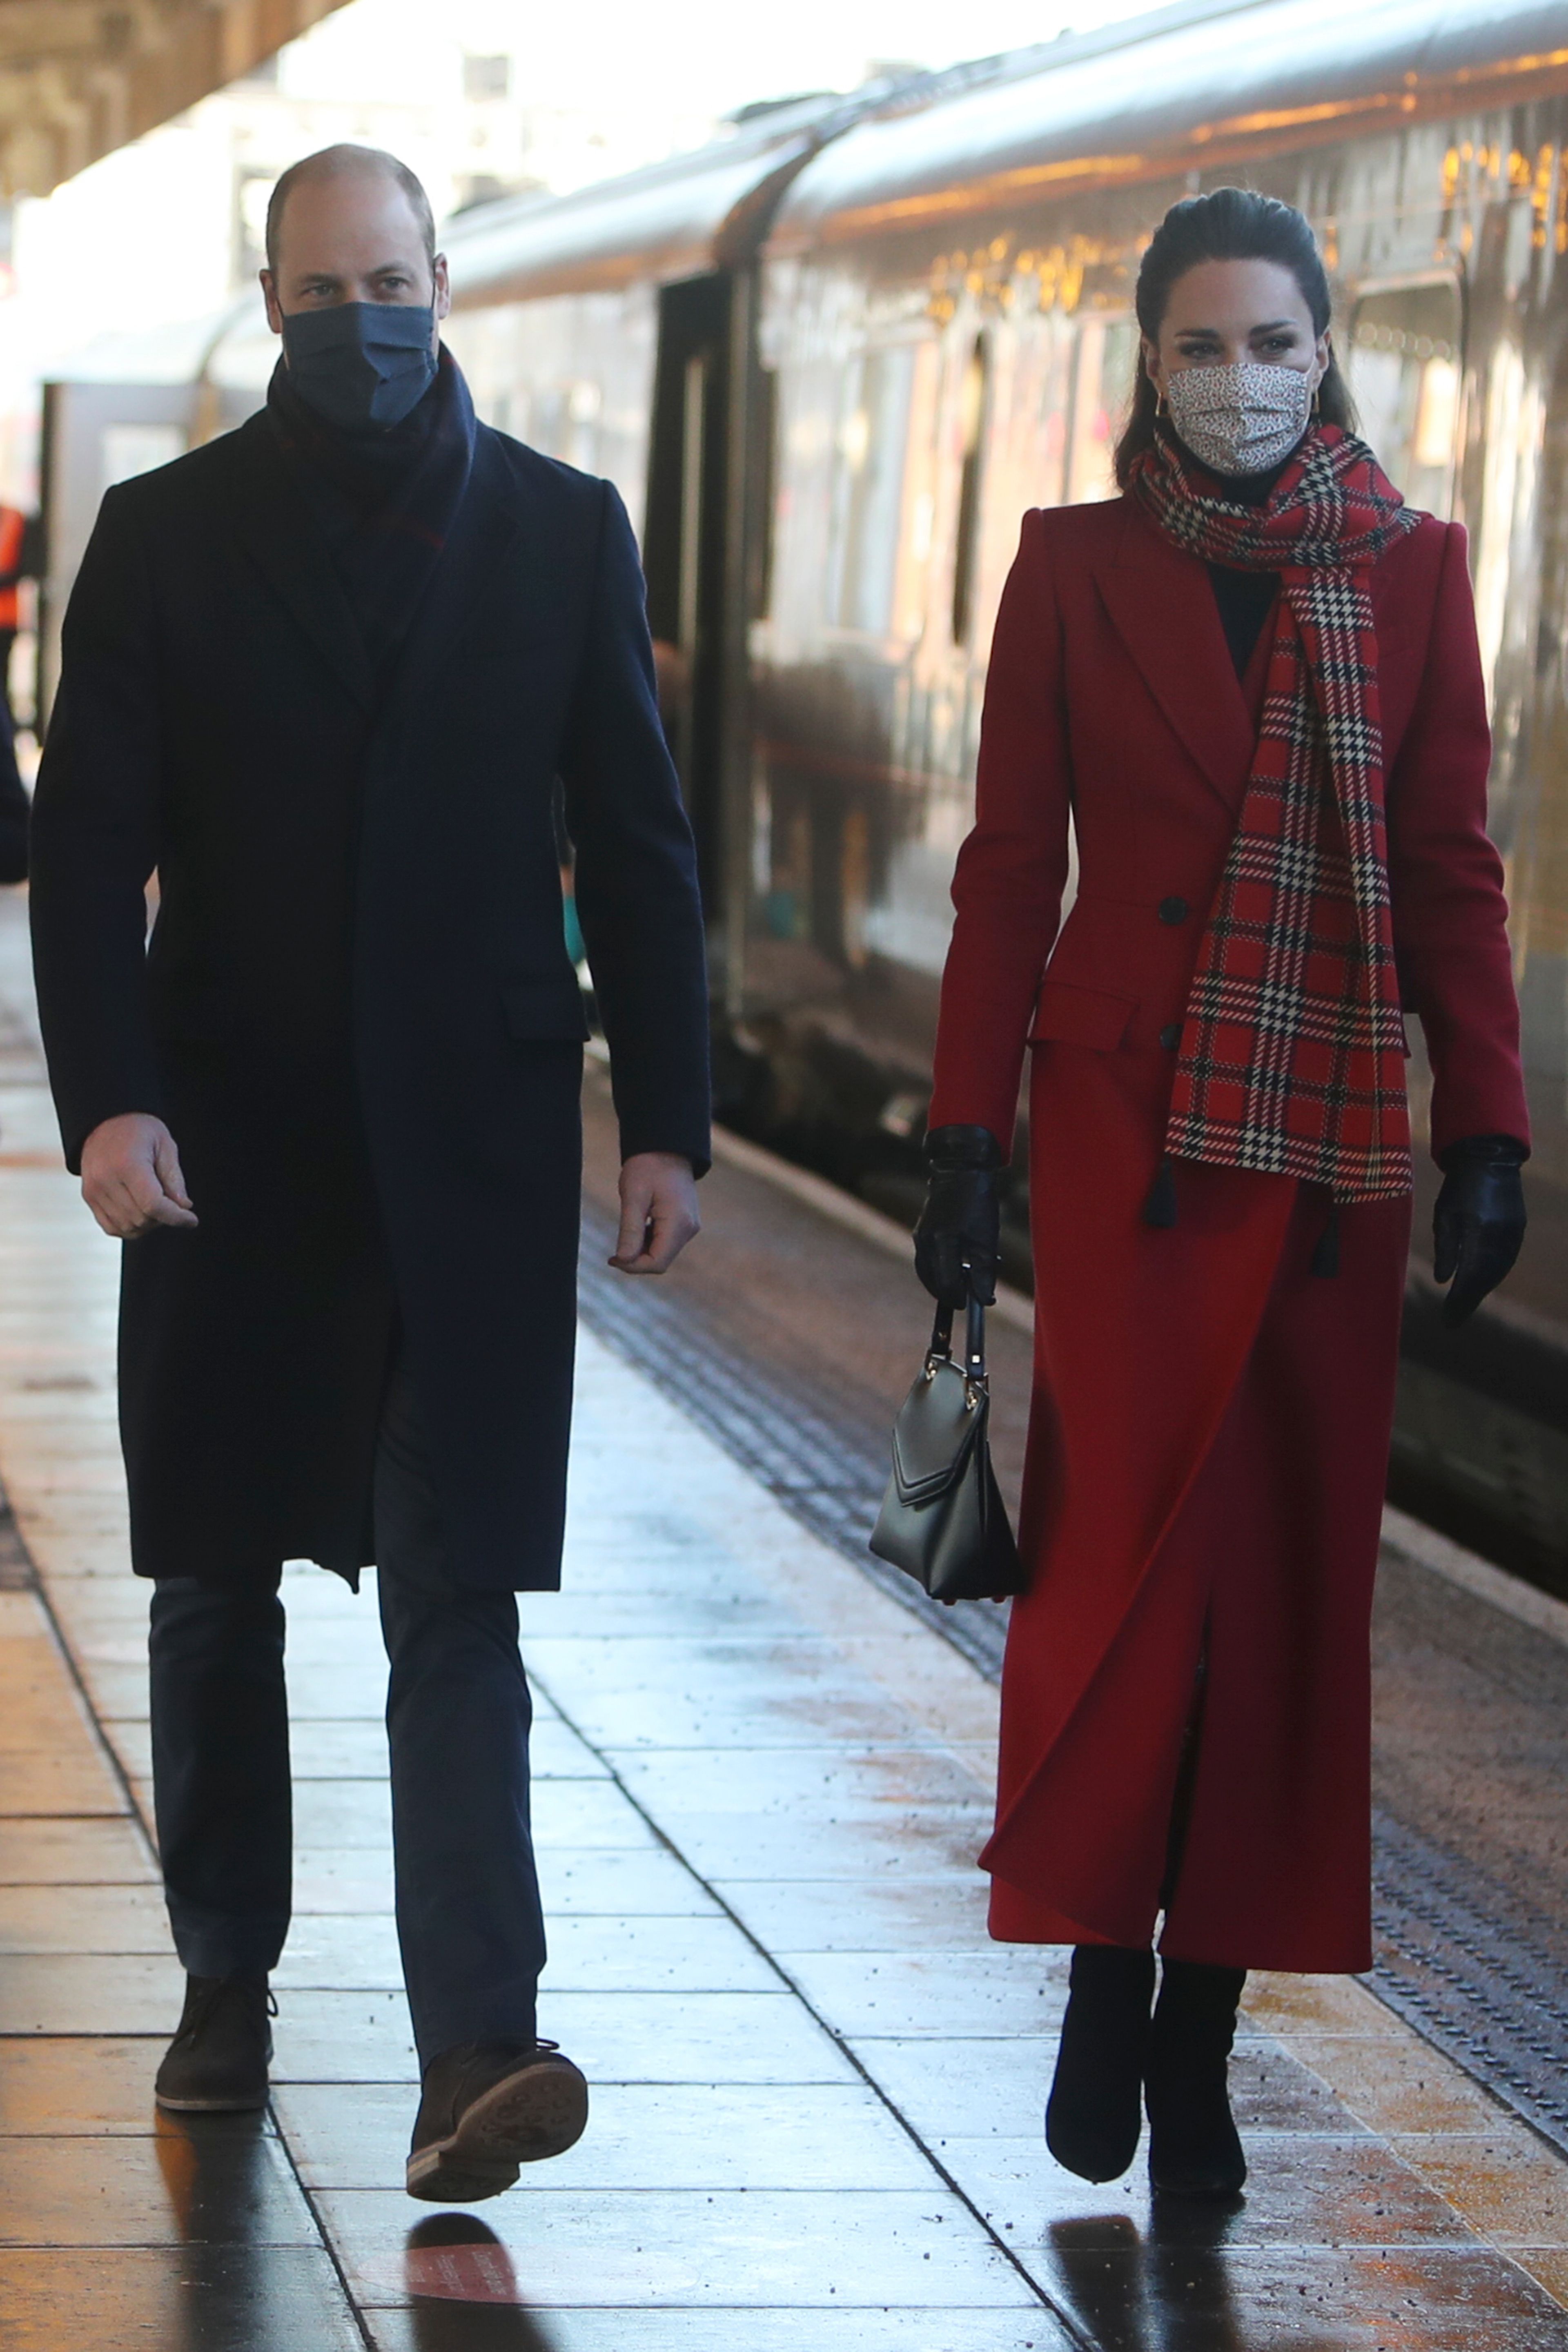 Prince William and Kate Middleton wearing masks and walking alongside eachother as they arrive at Cardiff Central train station in South Wales on Dec. 8, 2020